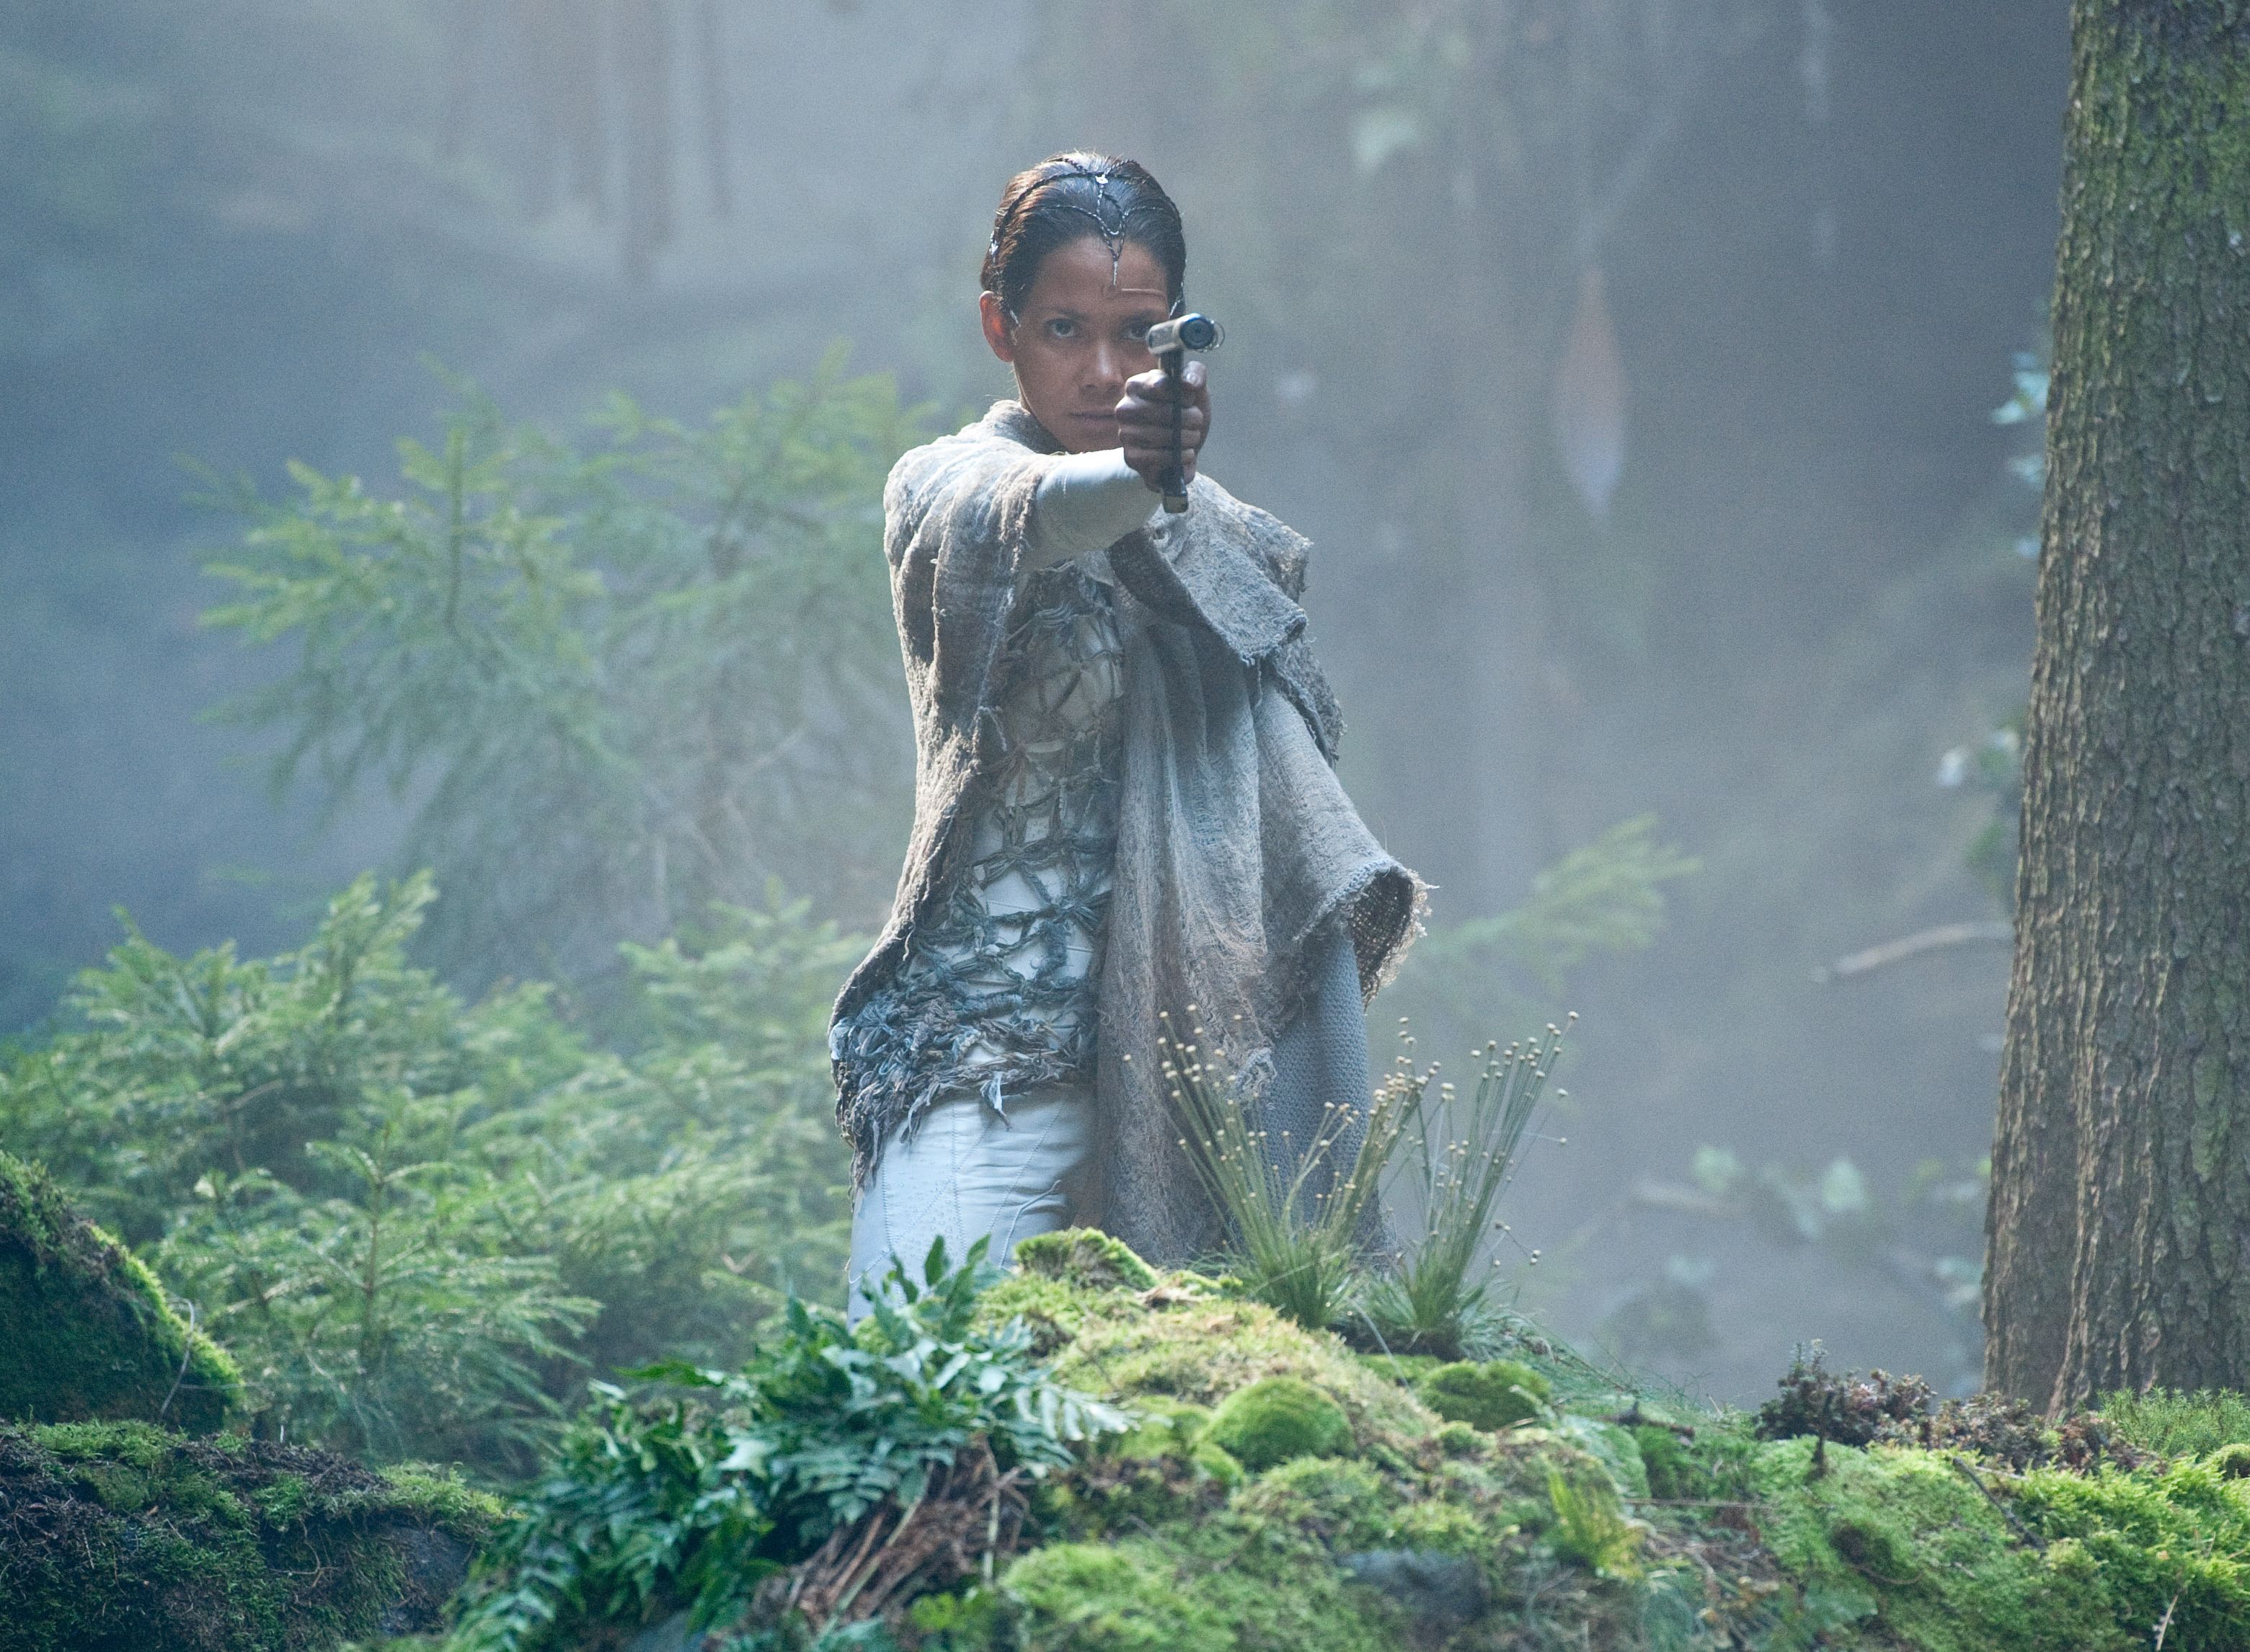 Halle Berry ready to shoot as Meronym in Cloud Atlas